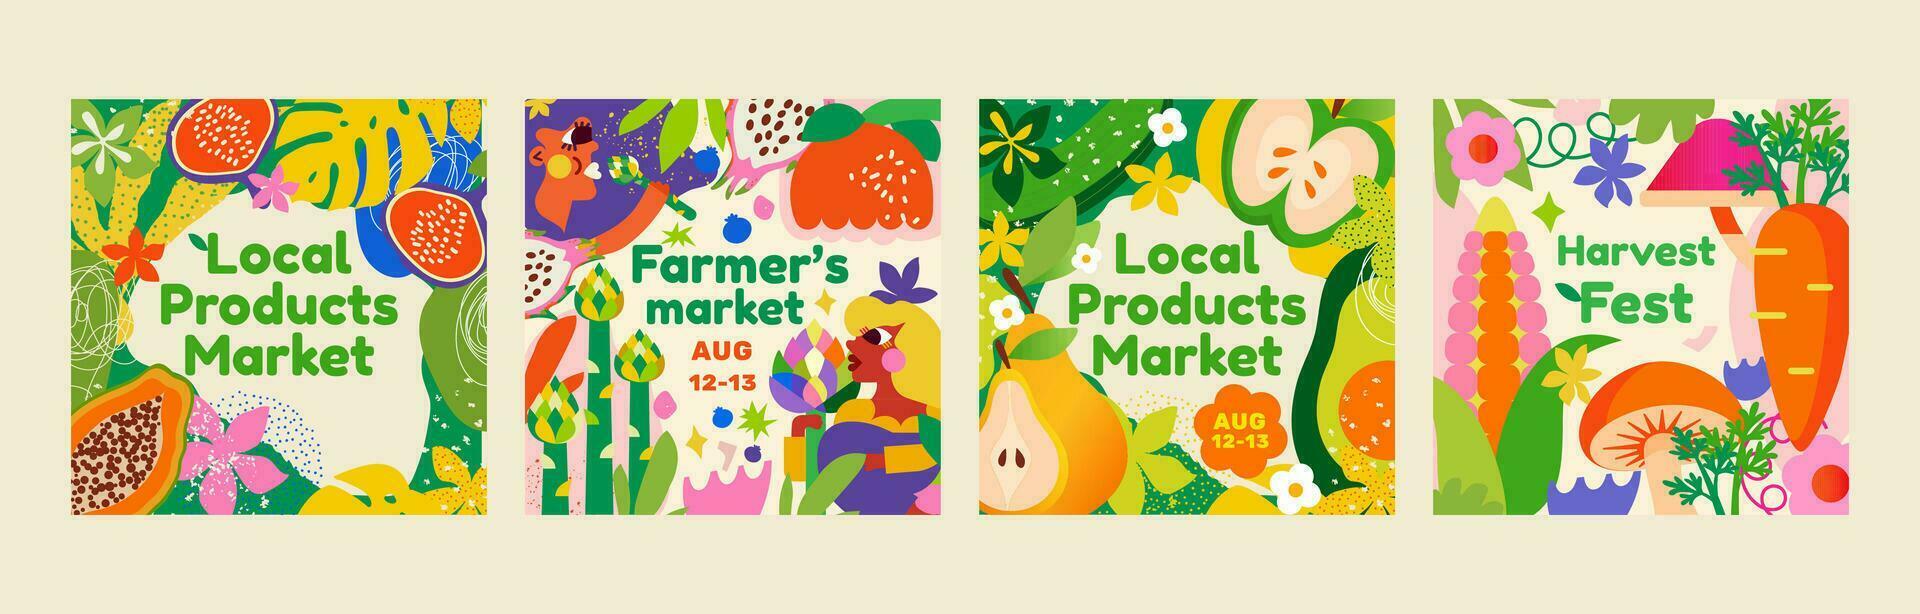 4 templates for a farmers market, harvest festival or food fair. Suitable as a banner, advertisement or signboard .  This design will definitely make your project stand out. vector